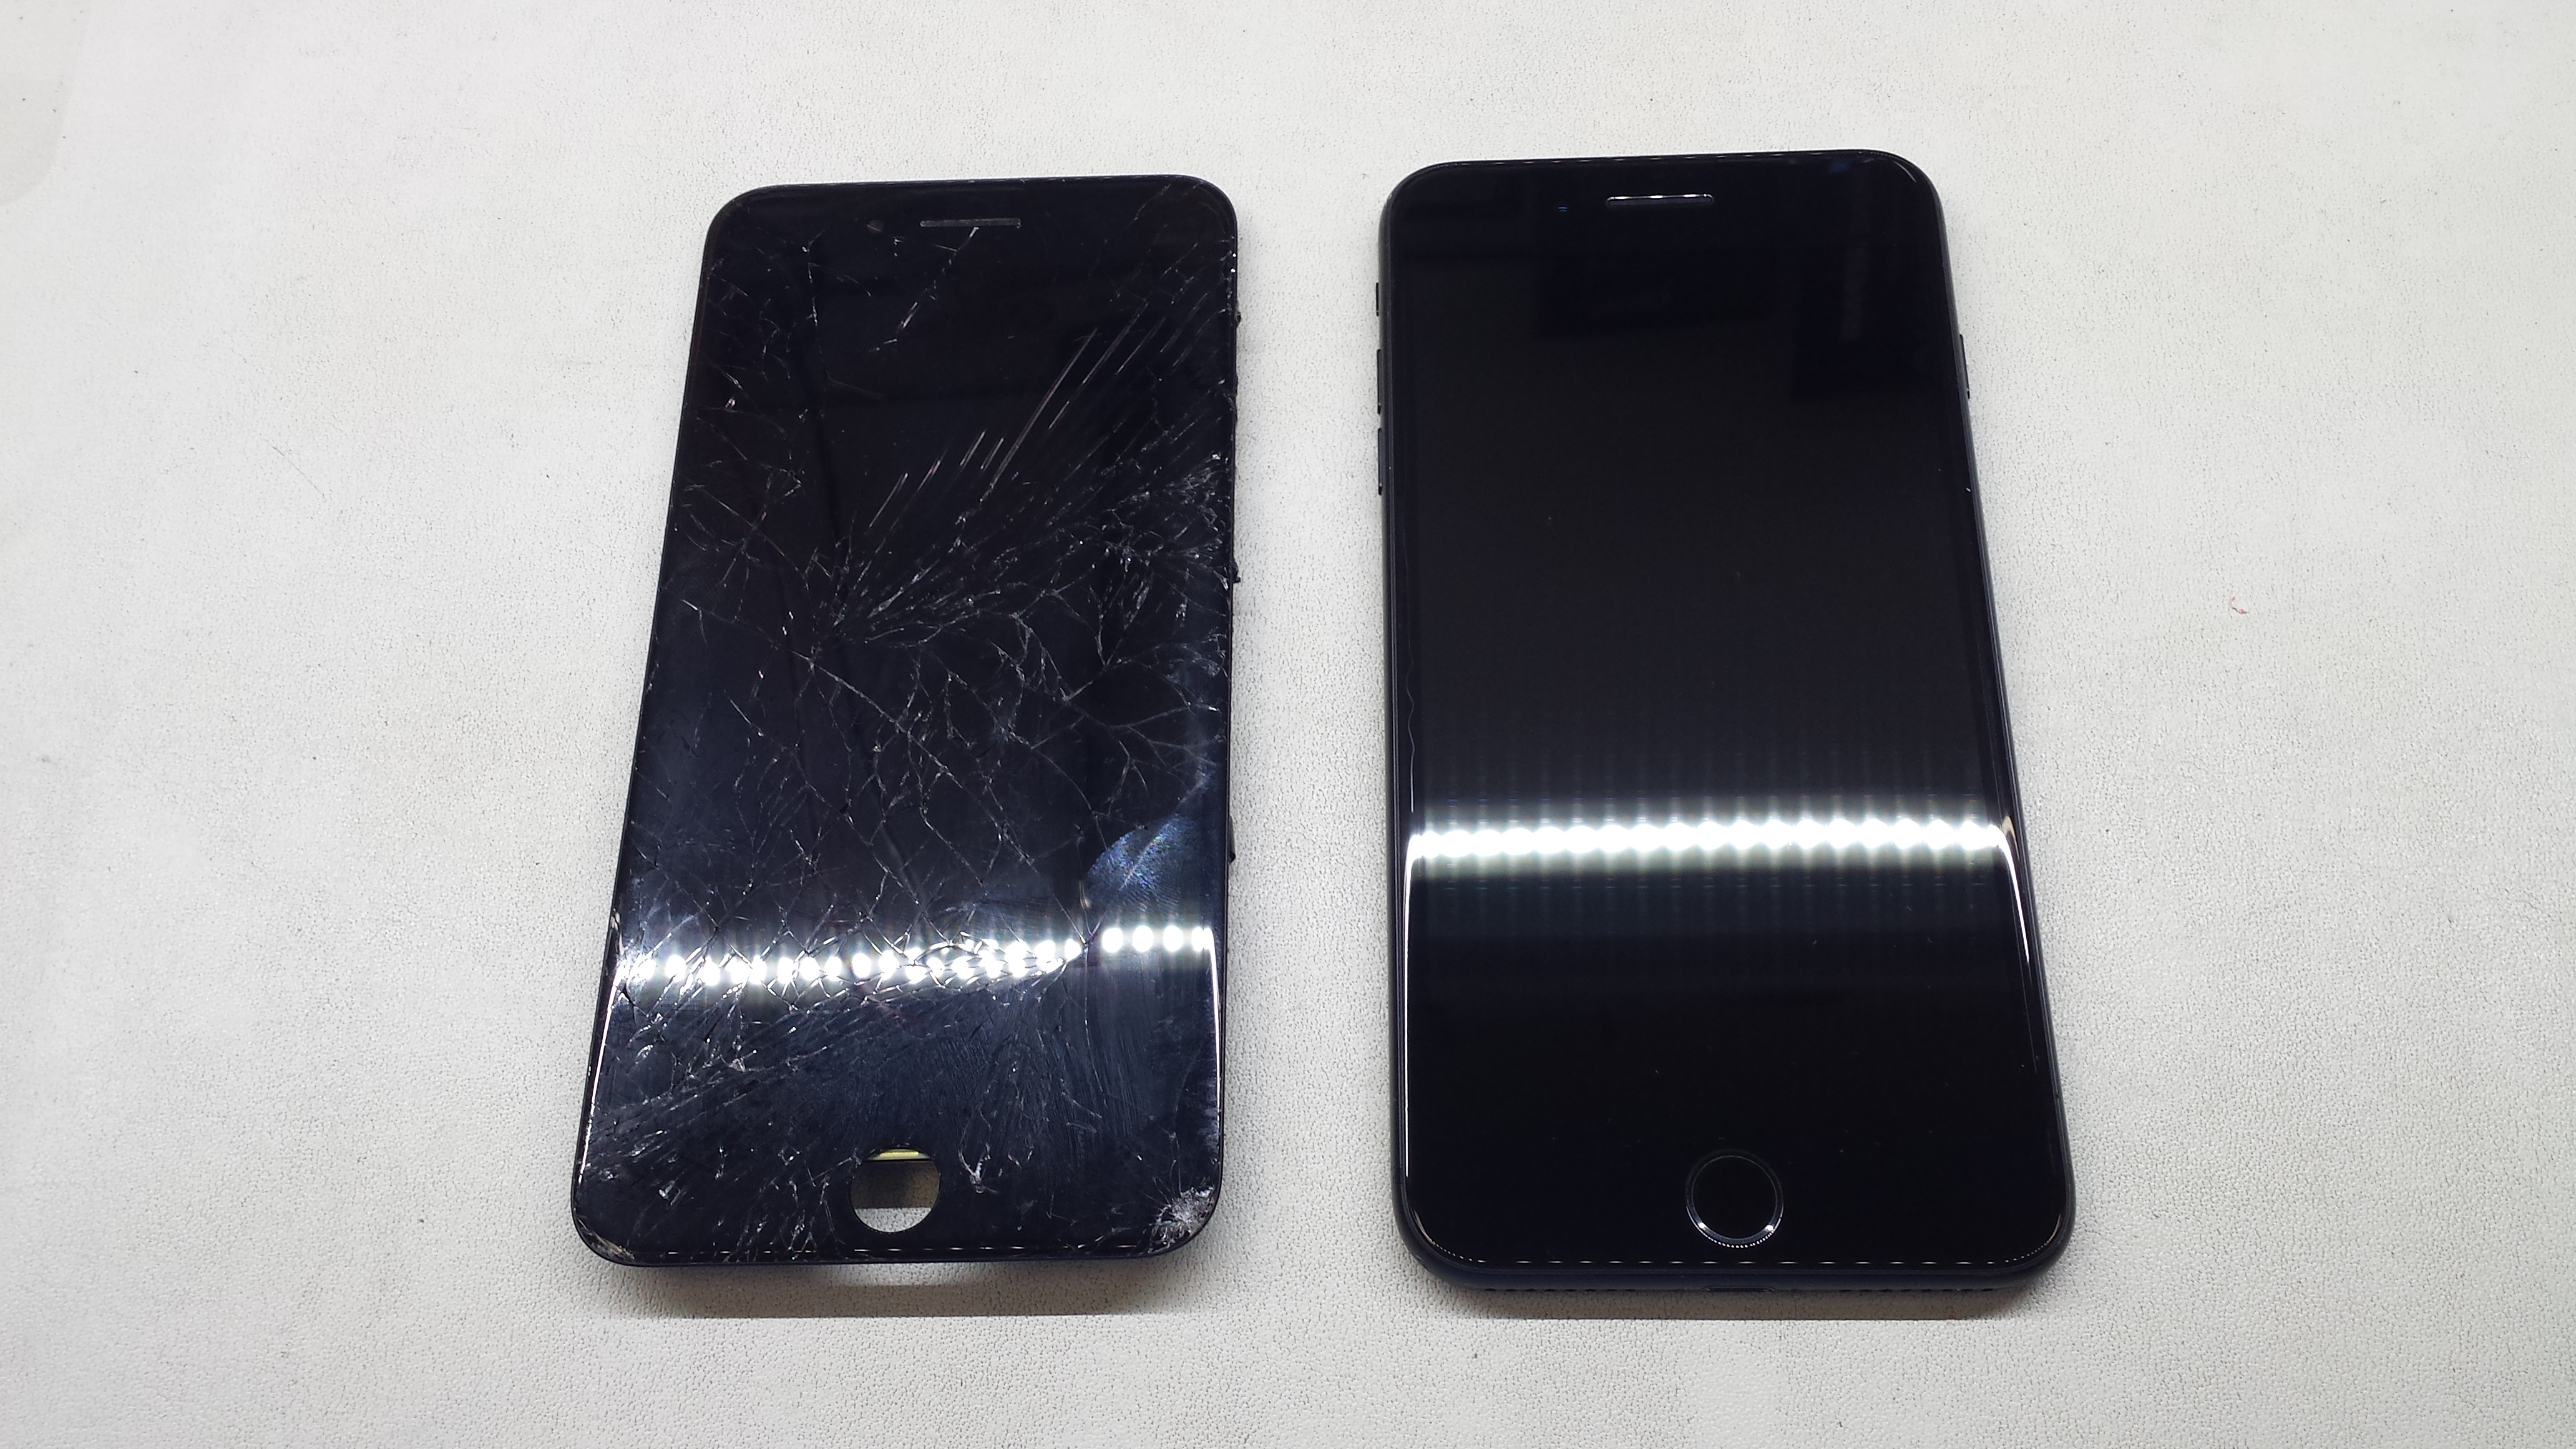 CPR Cell Phone Repair Snellville Photo